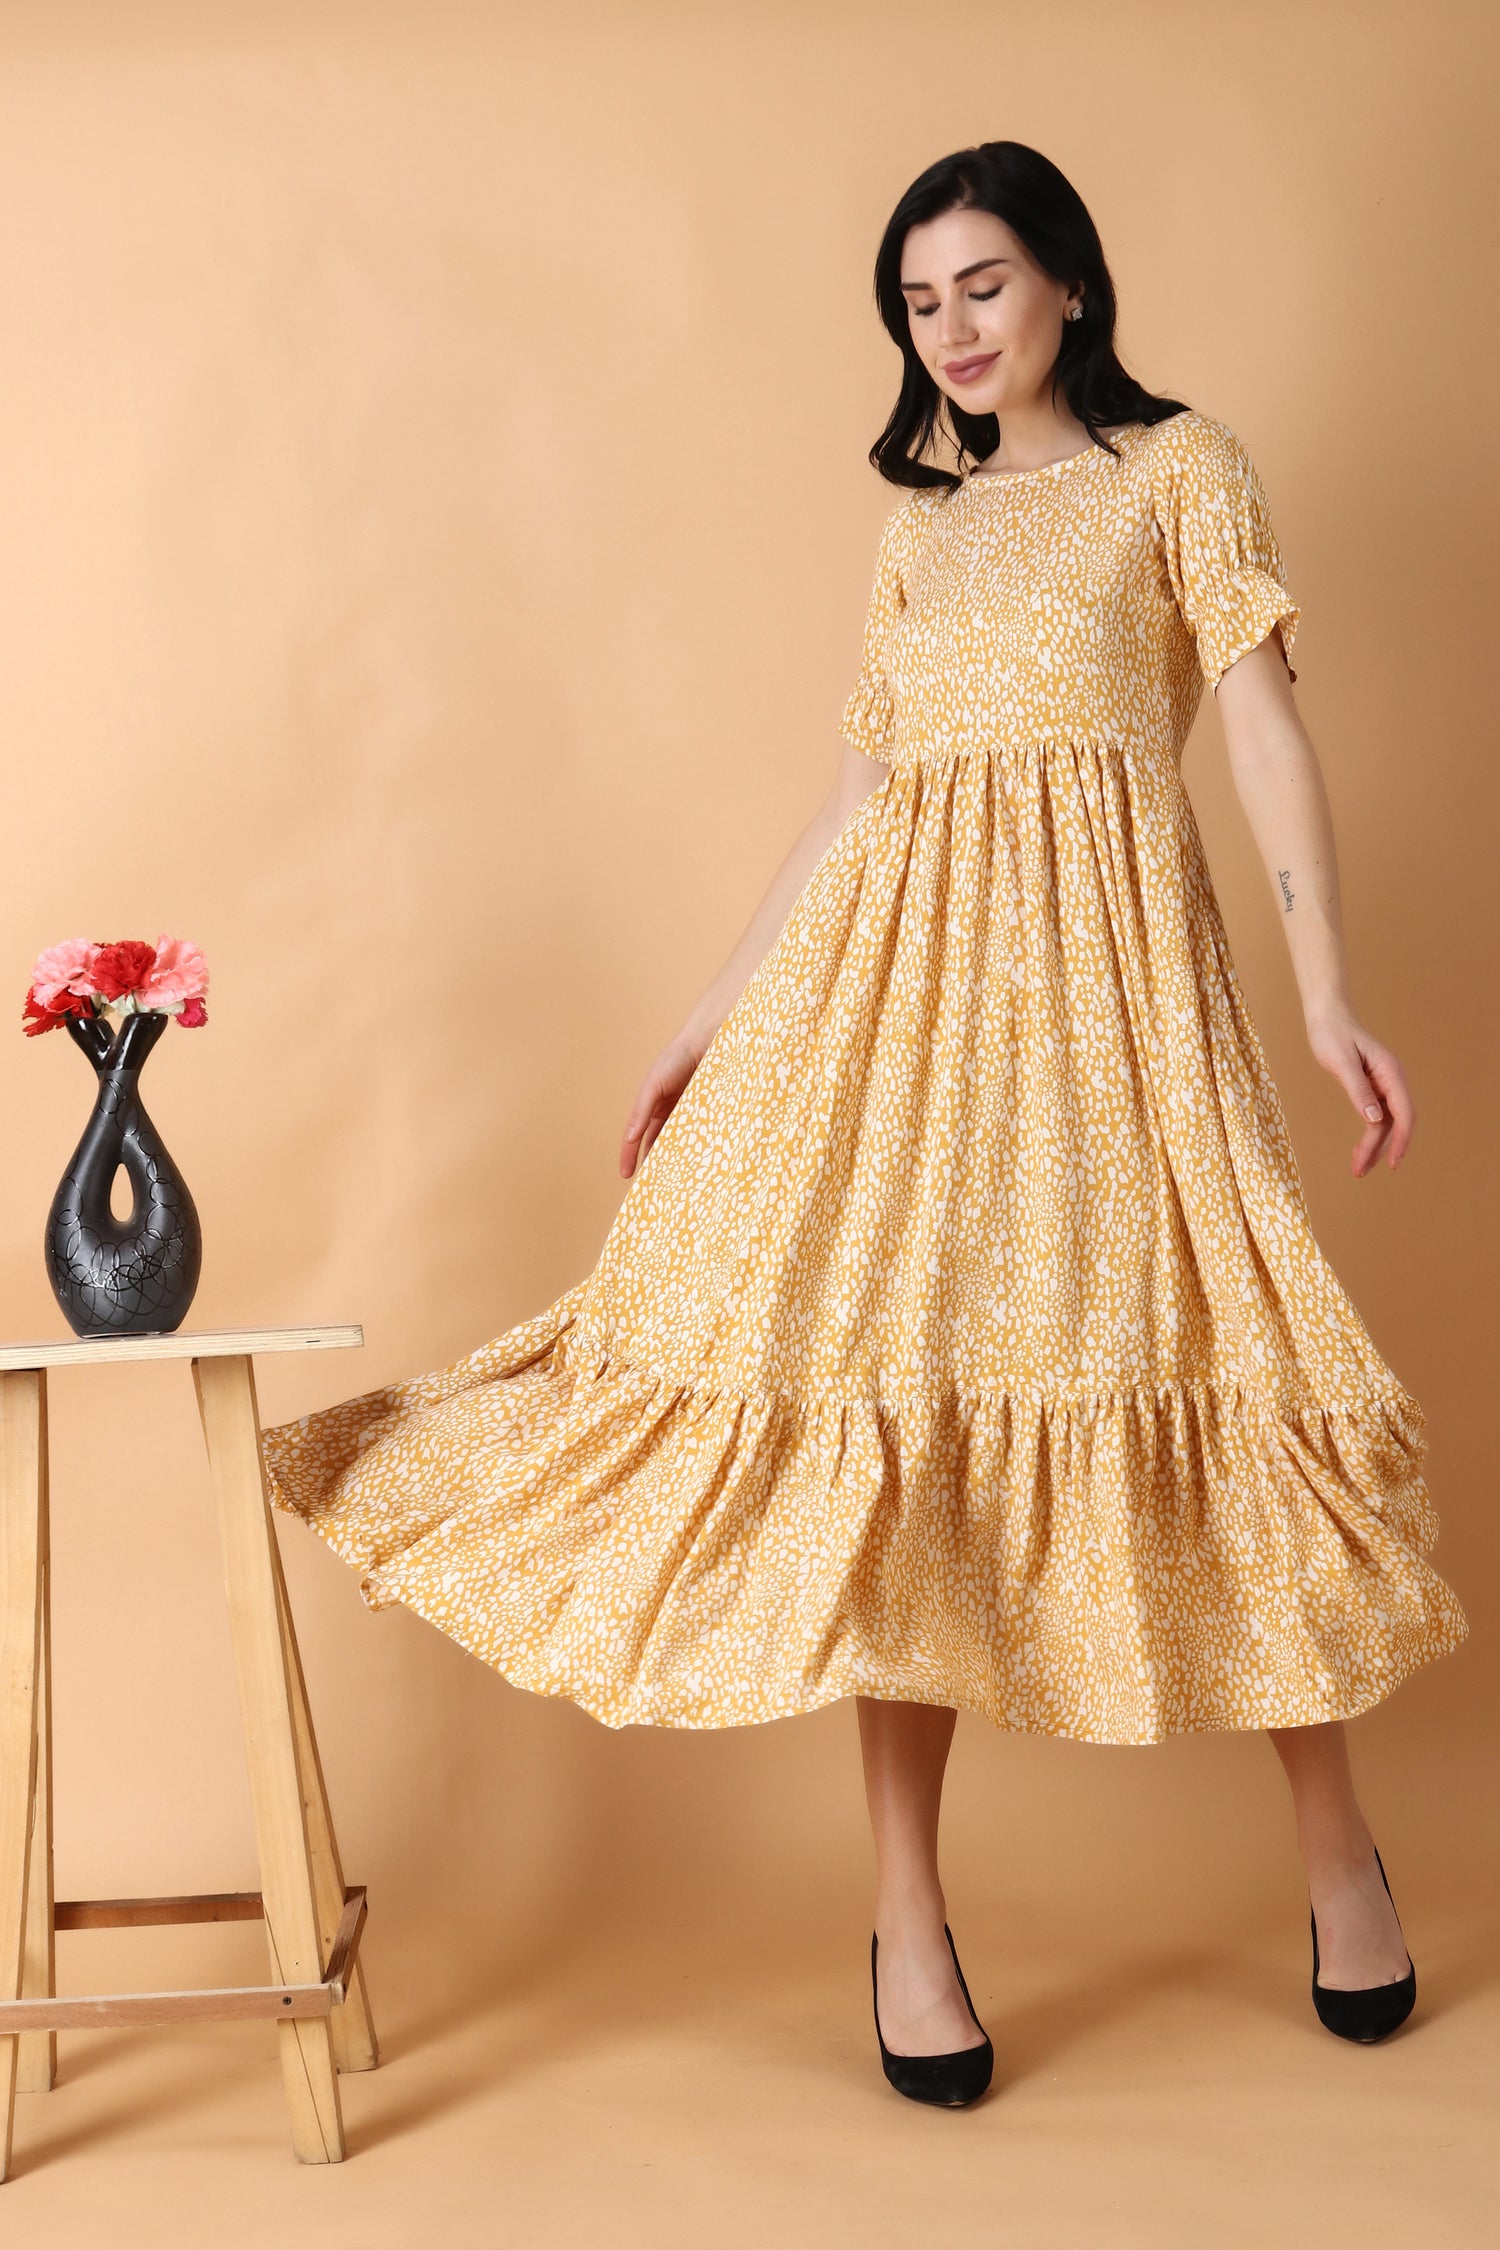 all sizes, boat, calf, flared, plus size, plus size dress, puffed half sleeves, rayon, yellow